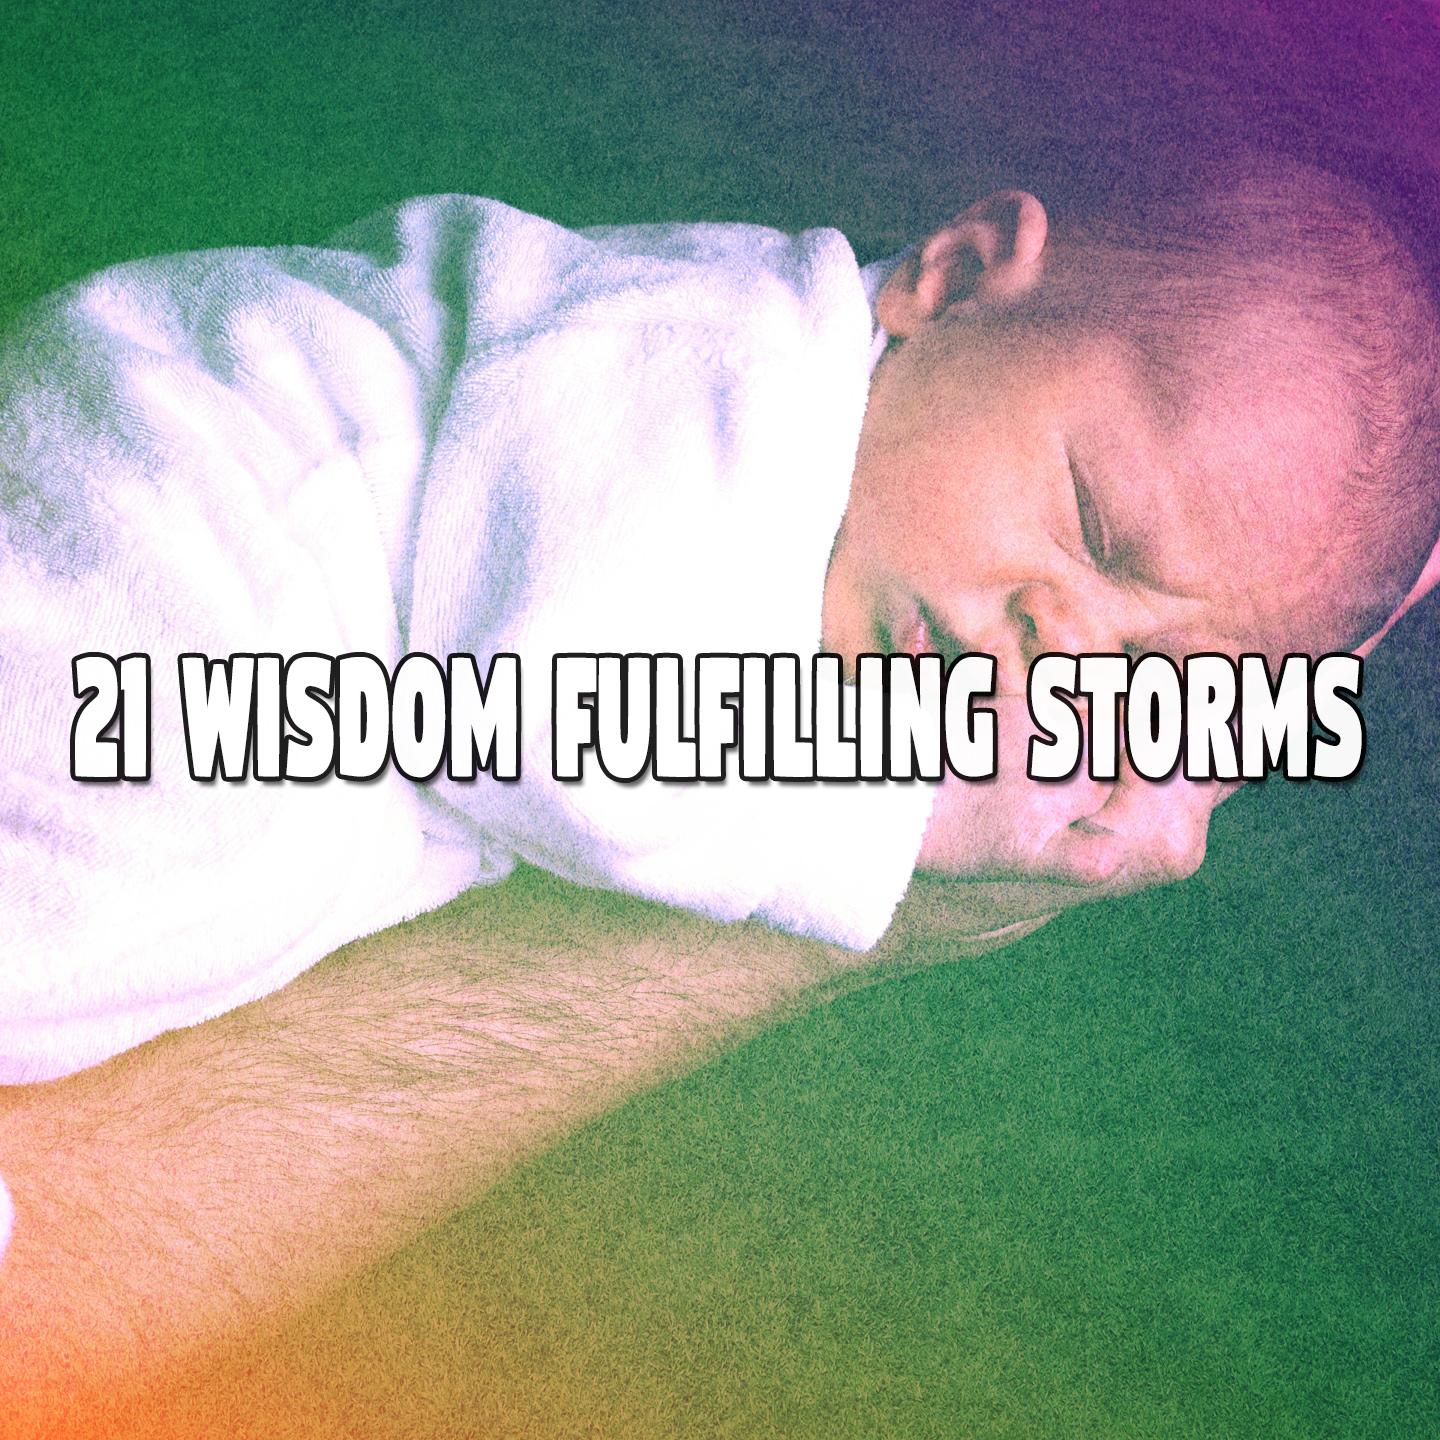 21 Wisdom Fulfilling Storms